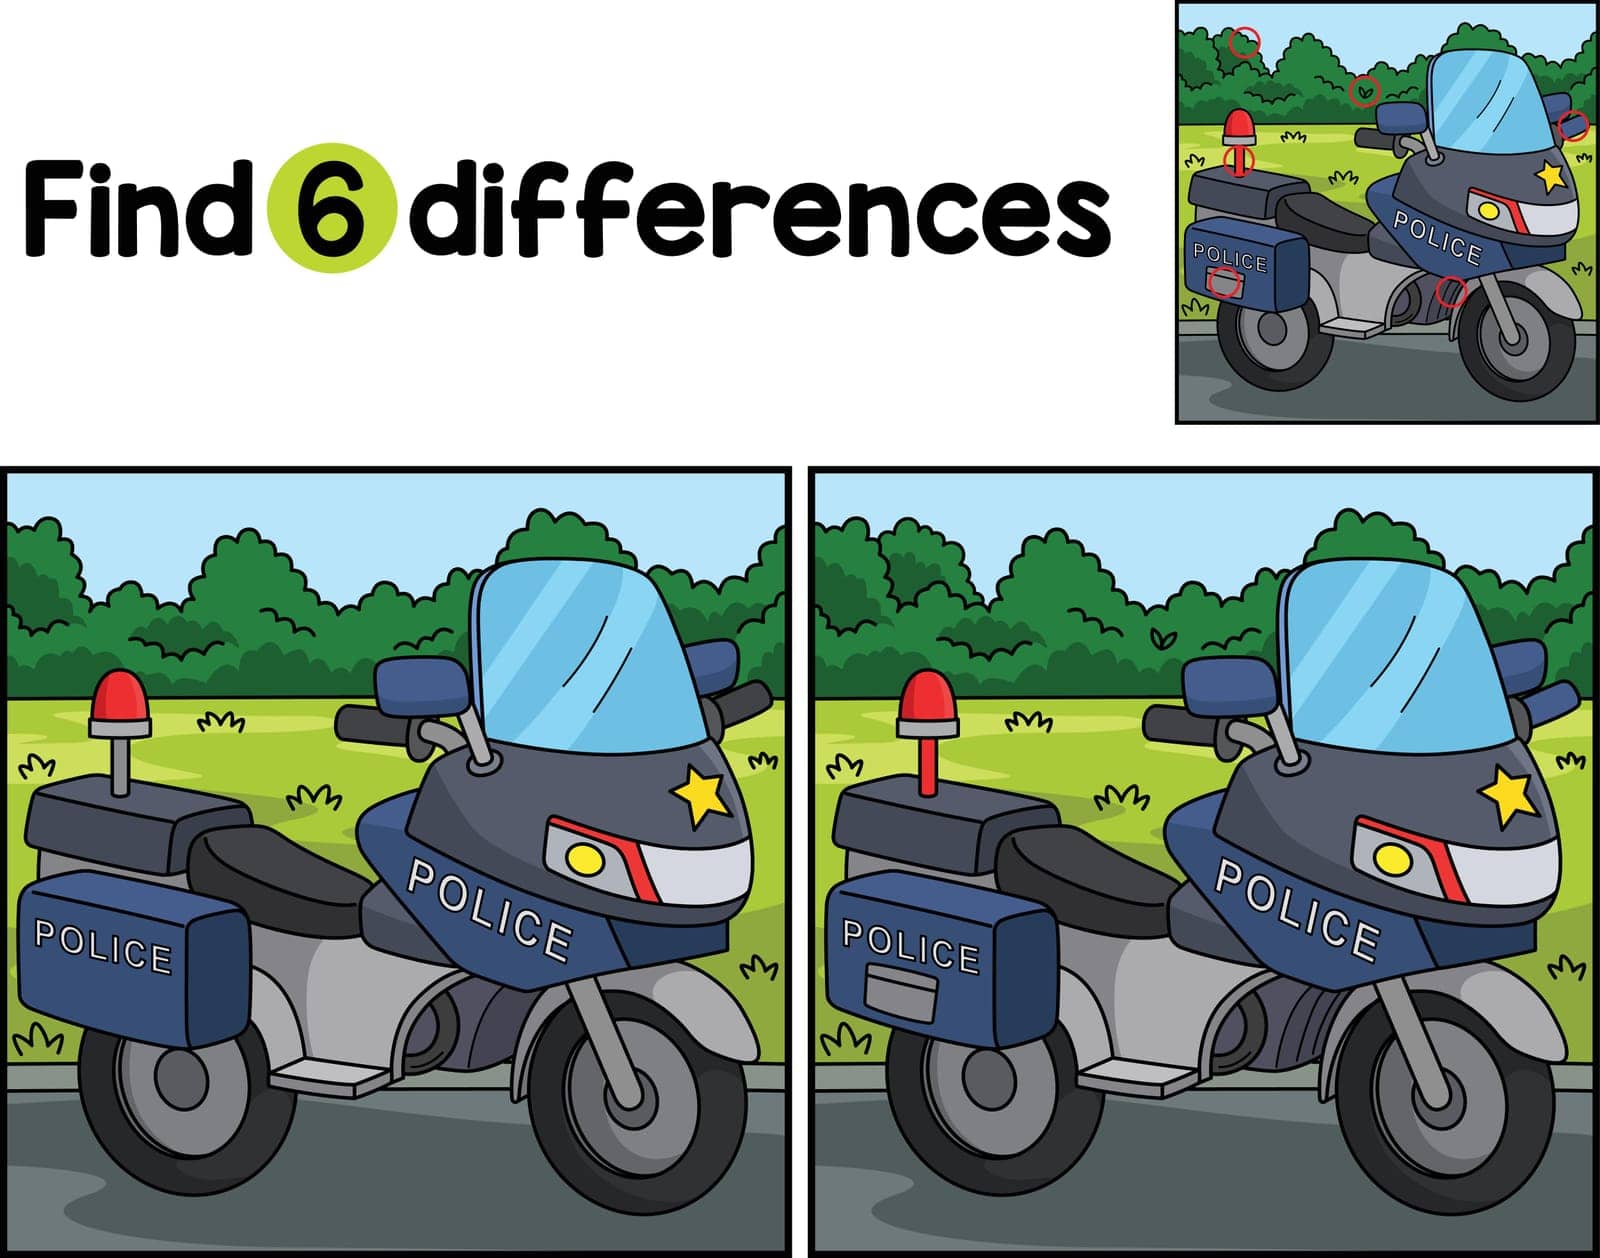 Police Motorcycle Find The Differences by abbydesign